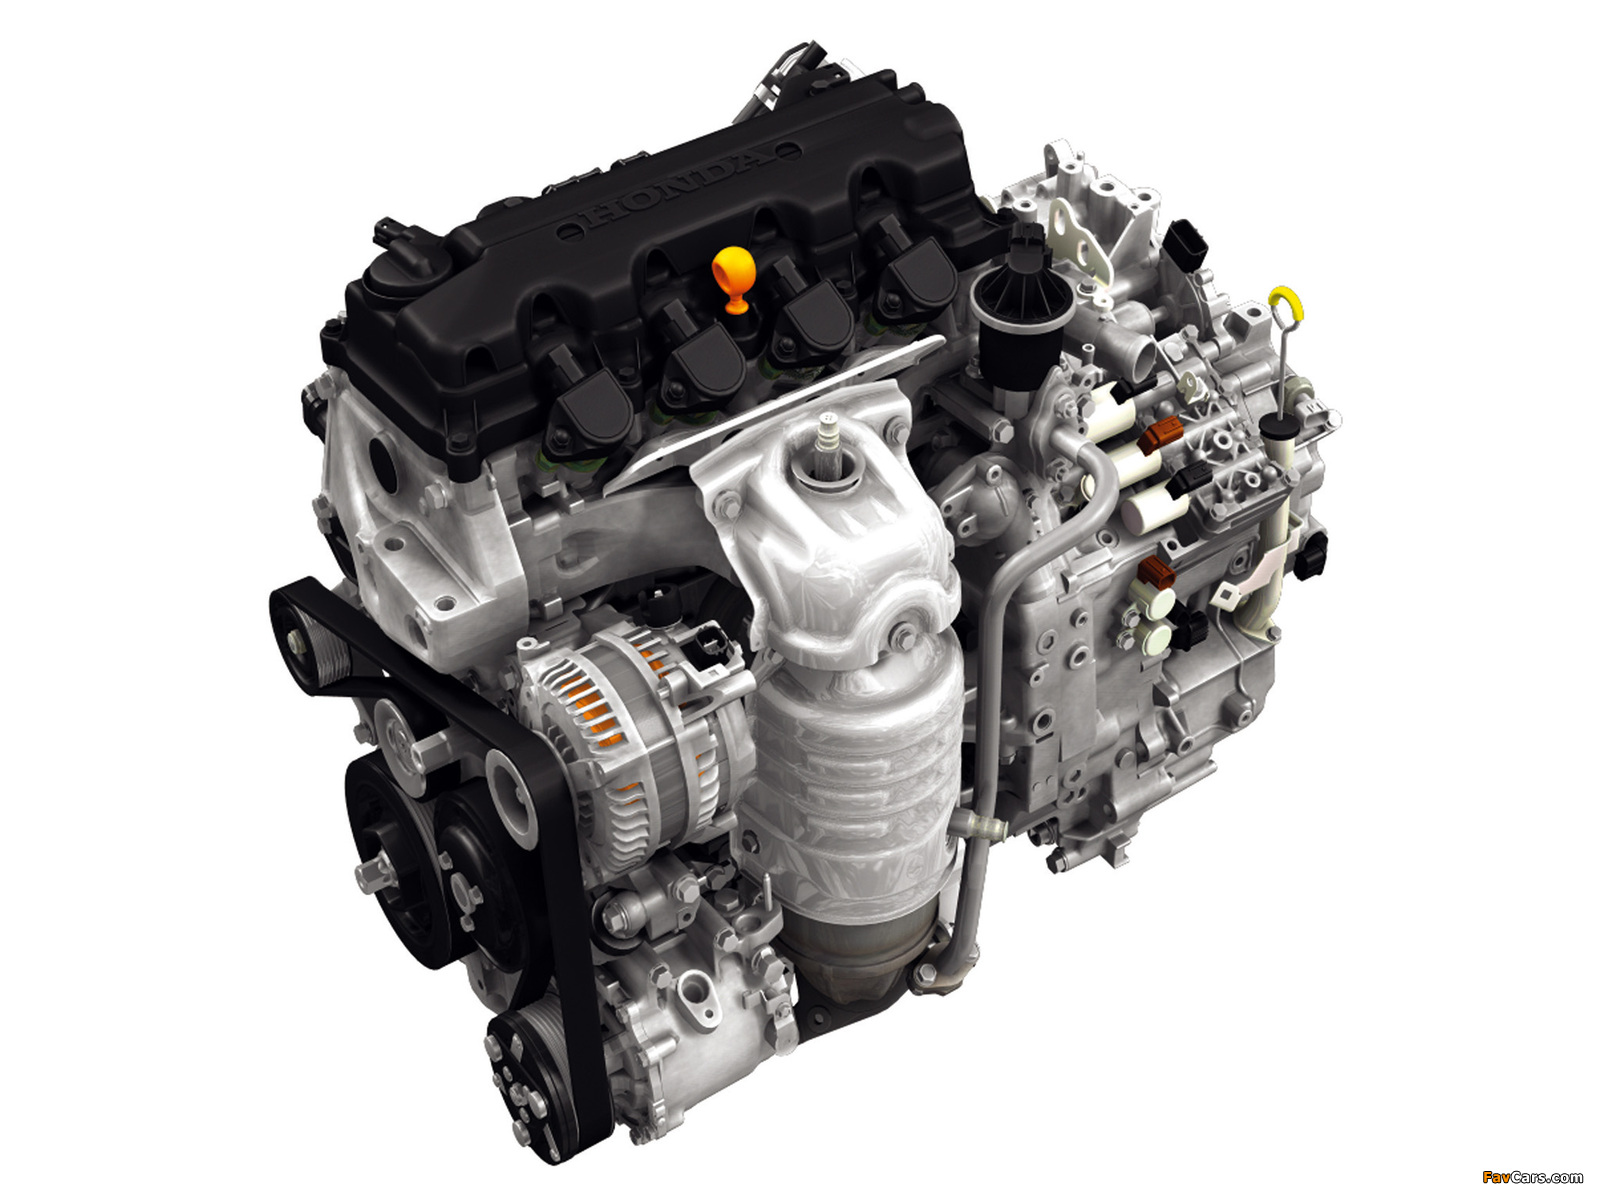 Images of Engines Honda K20A6 (1600 x 1200)